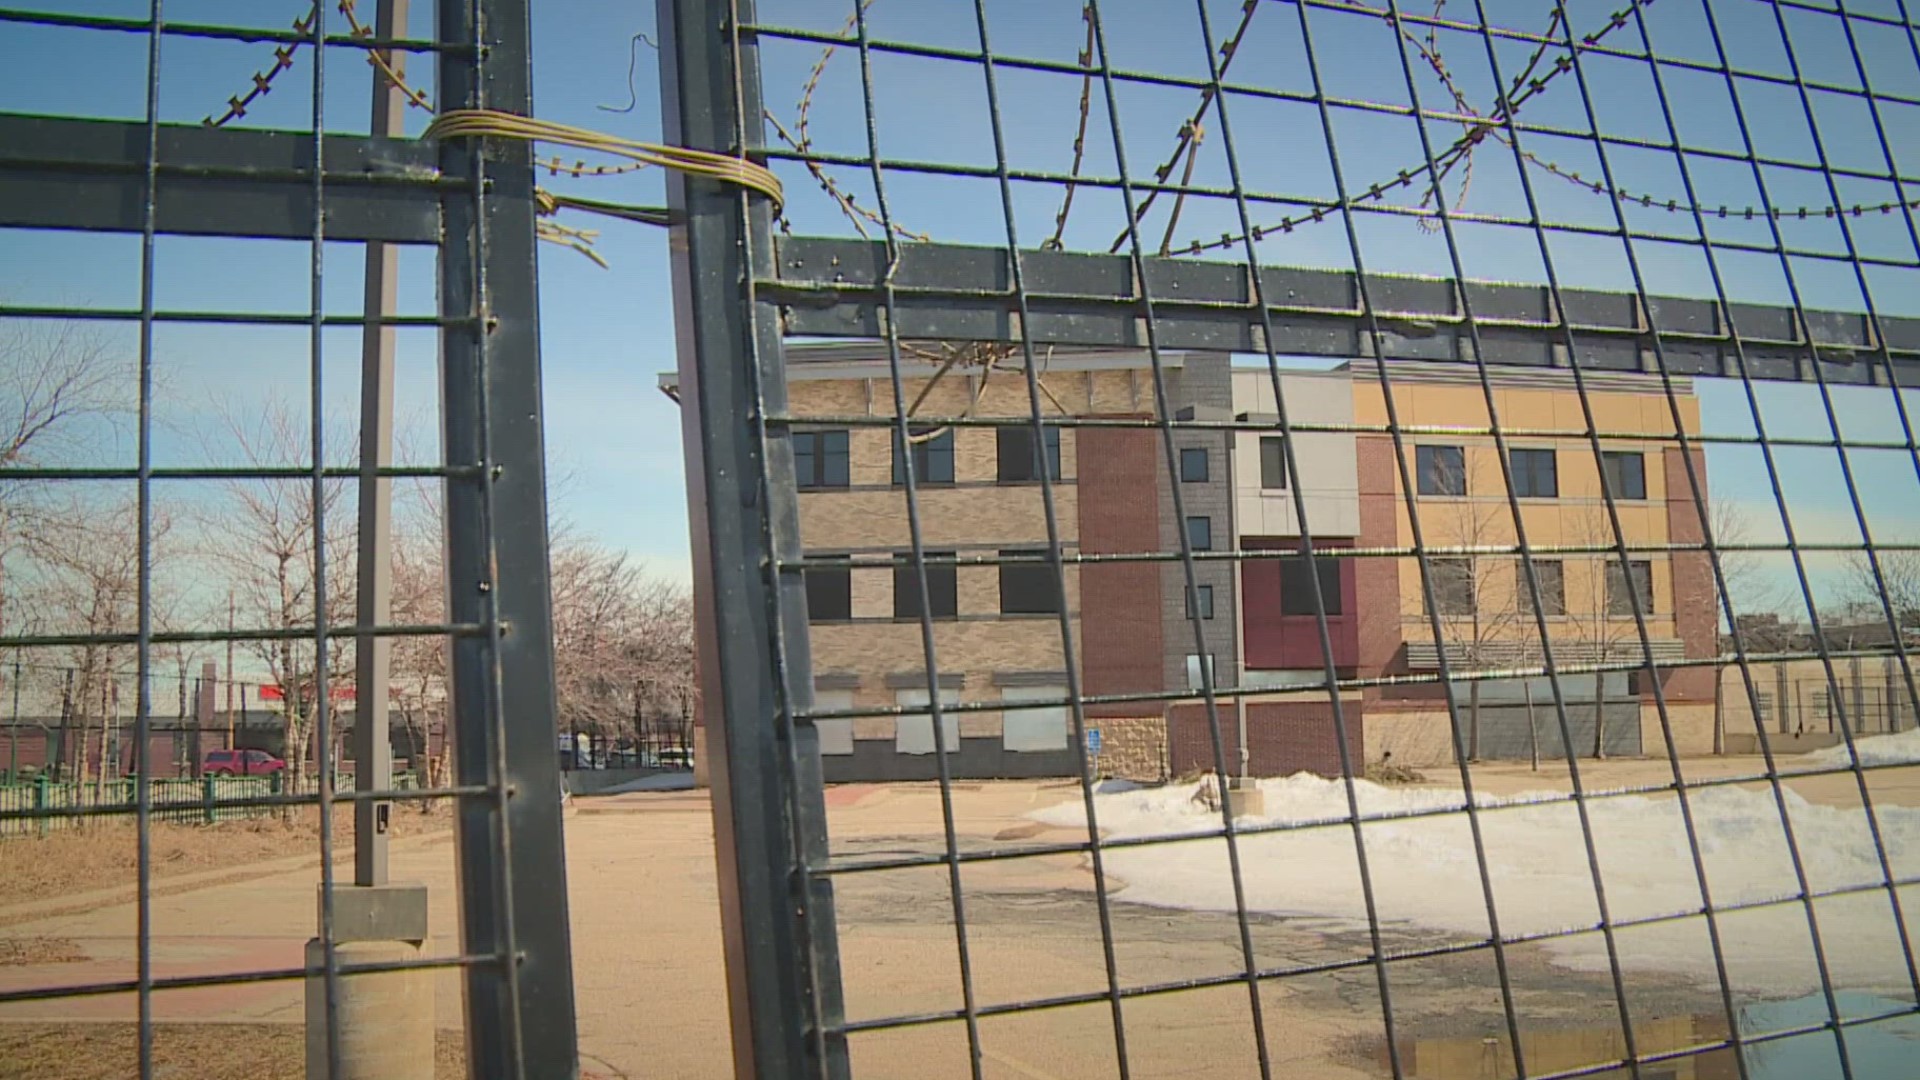 Minneapolis City Council has approved eliminating the Third Precinct site from ever again being considered for police use.